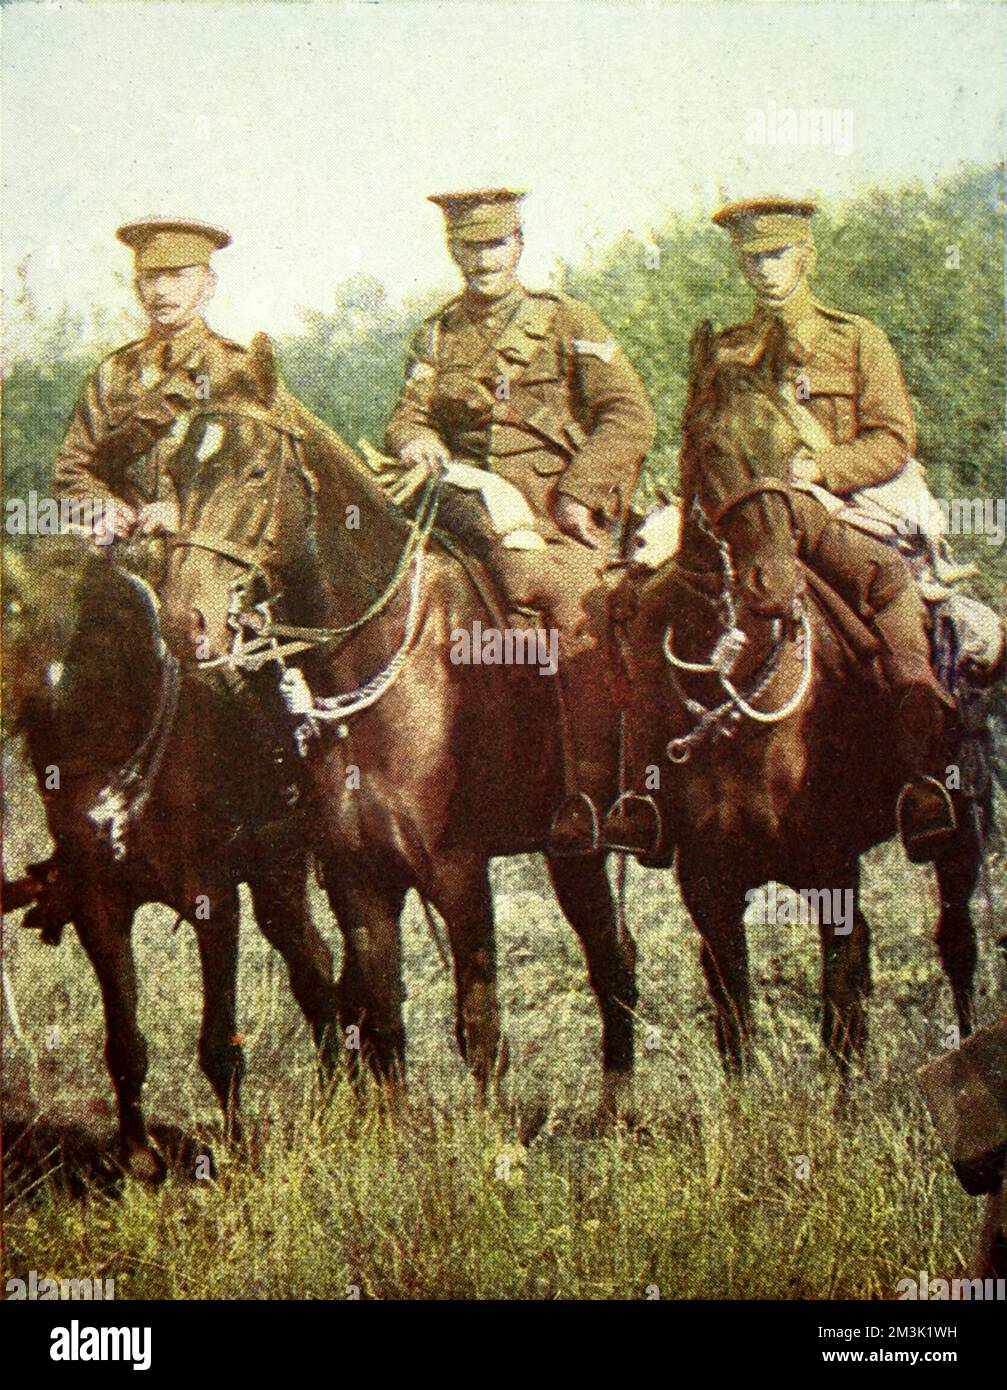 Dragoon guards of the Queen's Bays mounted during an exercise. The colour image was published by the Illustrated London News to show their readers how the British khaki uniforms appeared against a European landscape.     Date: 1916 Stock Photo